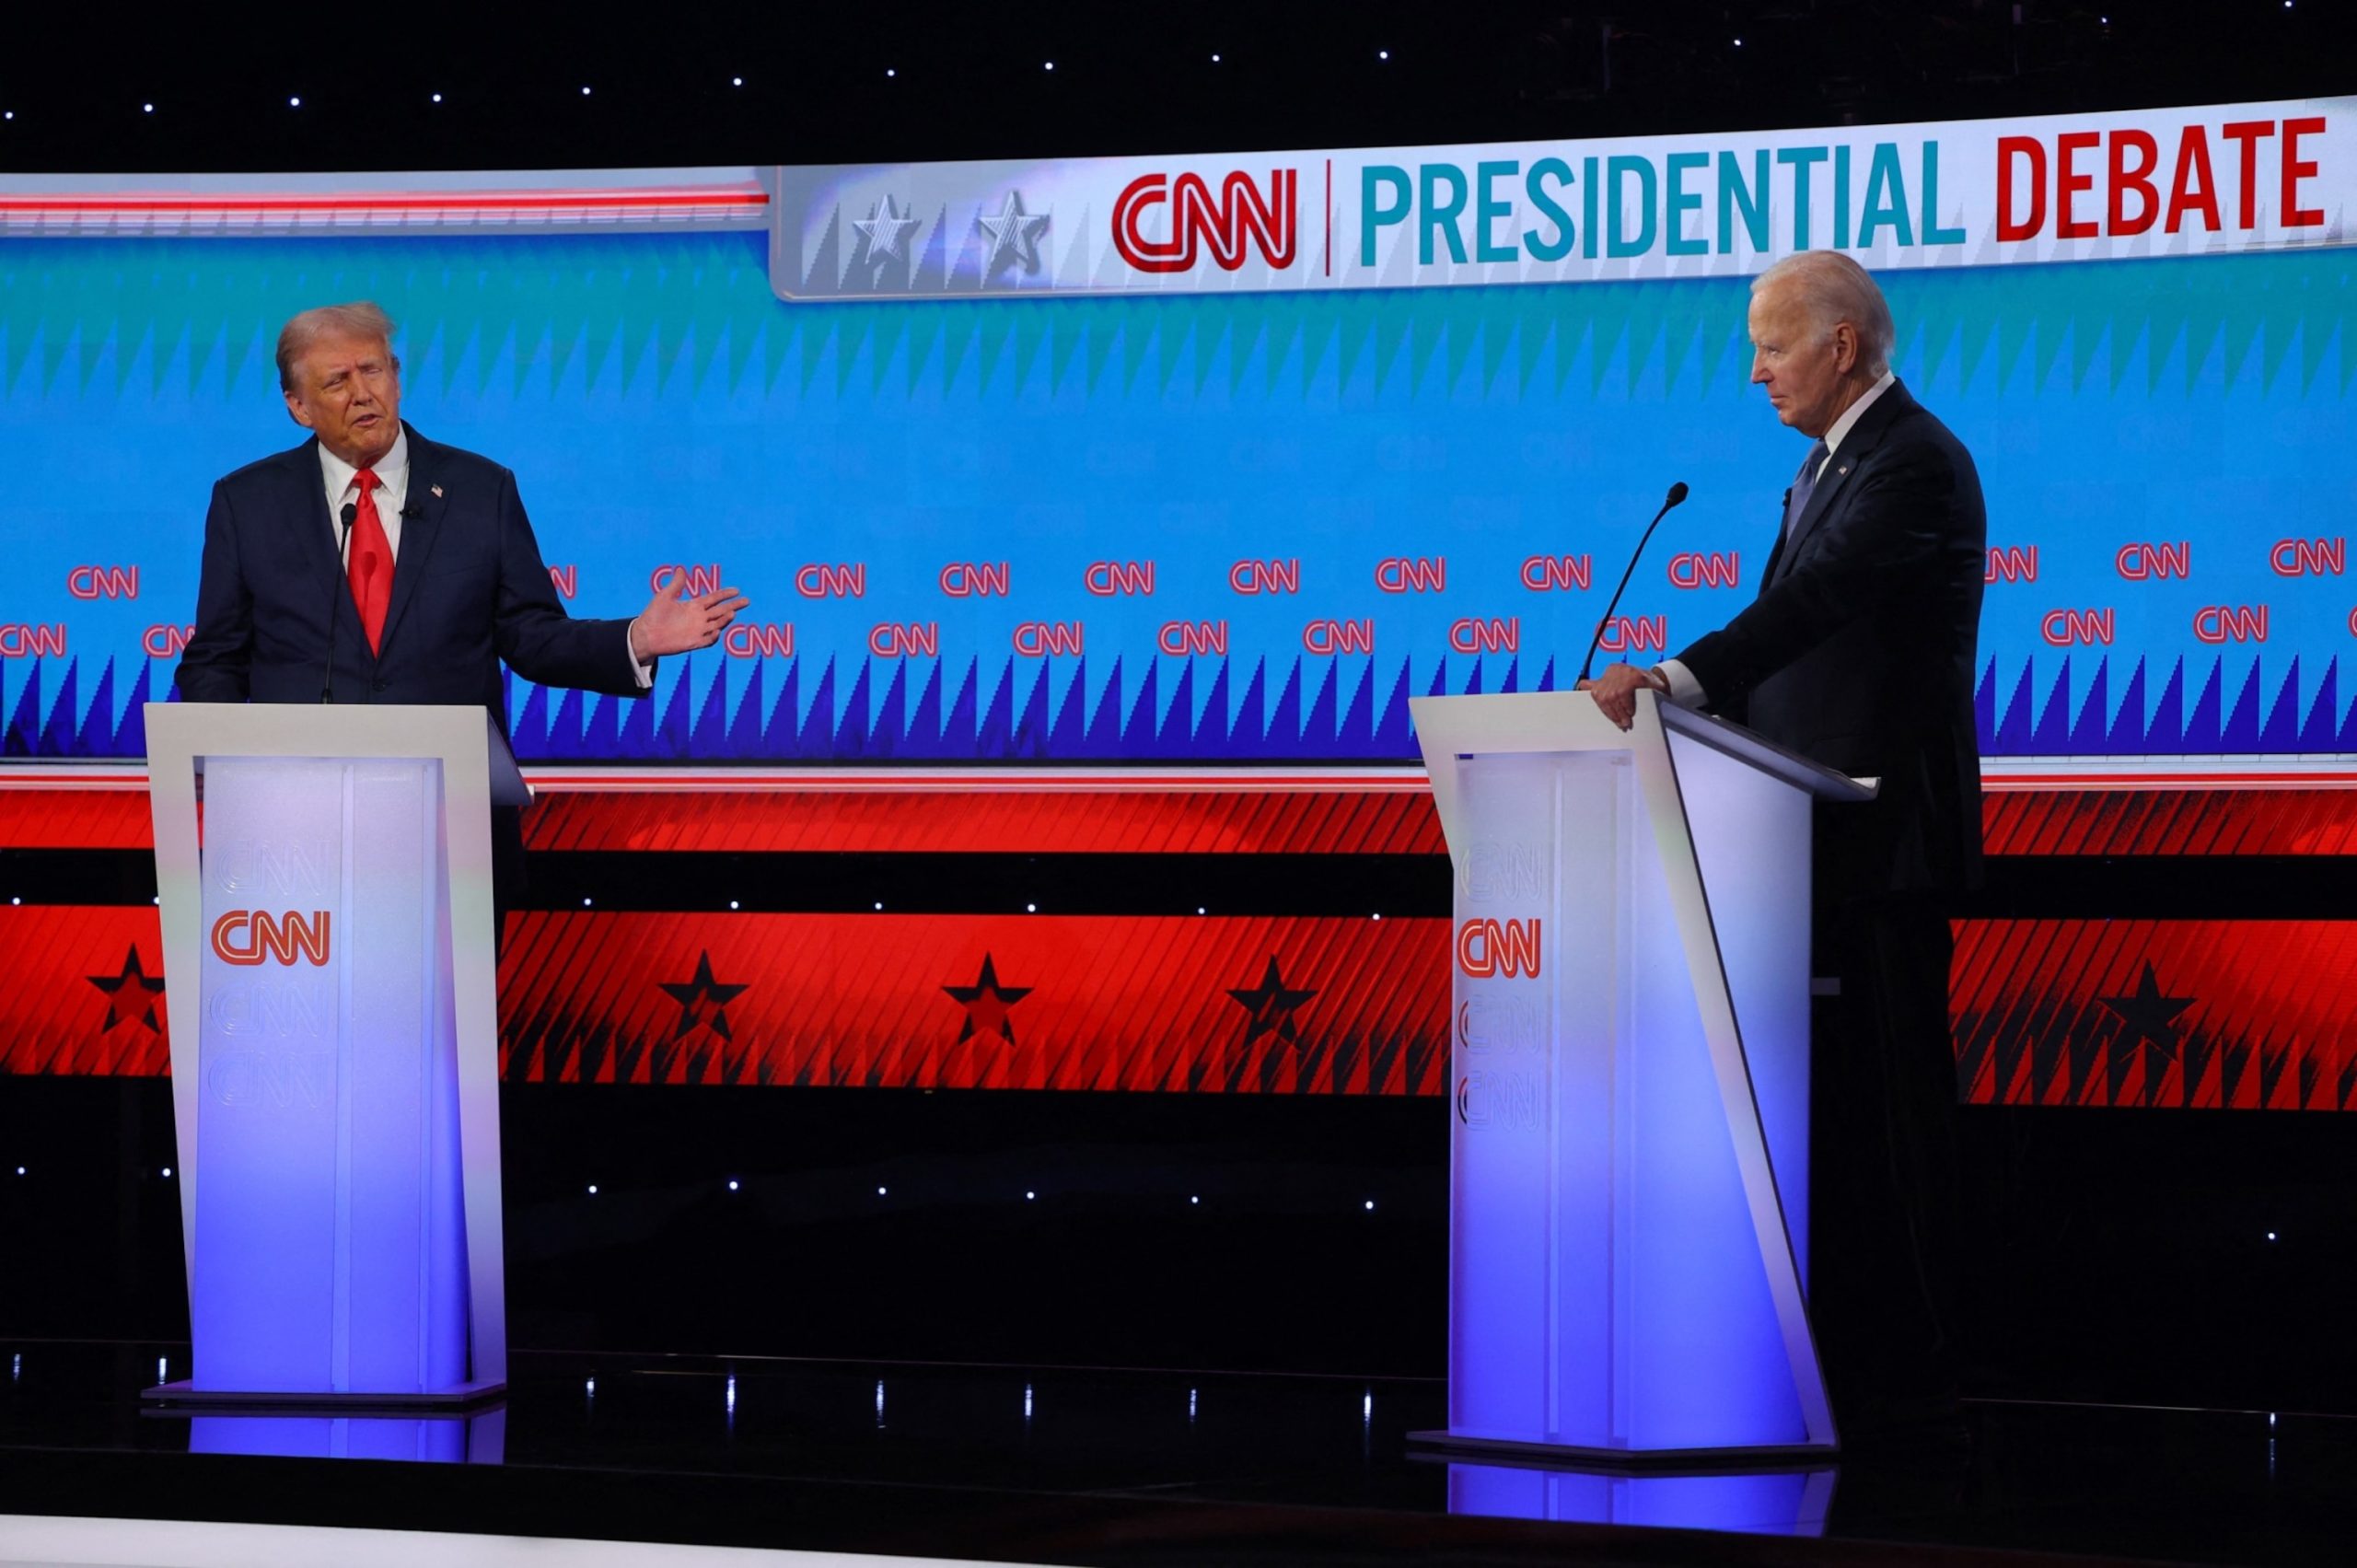 An analysis of the accuracy of statements made during the Biden-Trump presidential debate